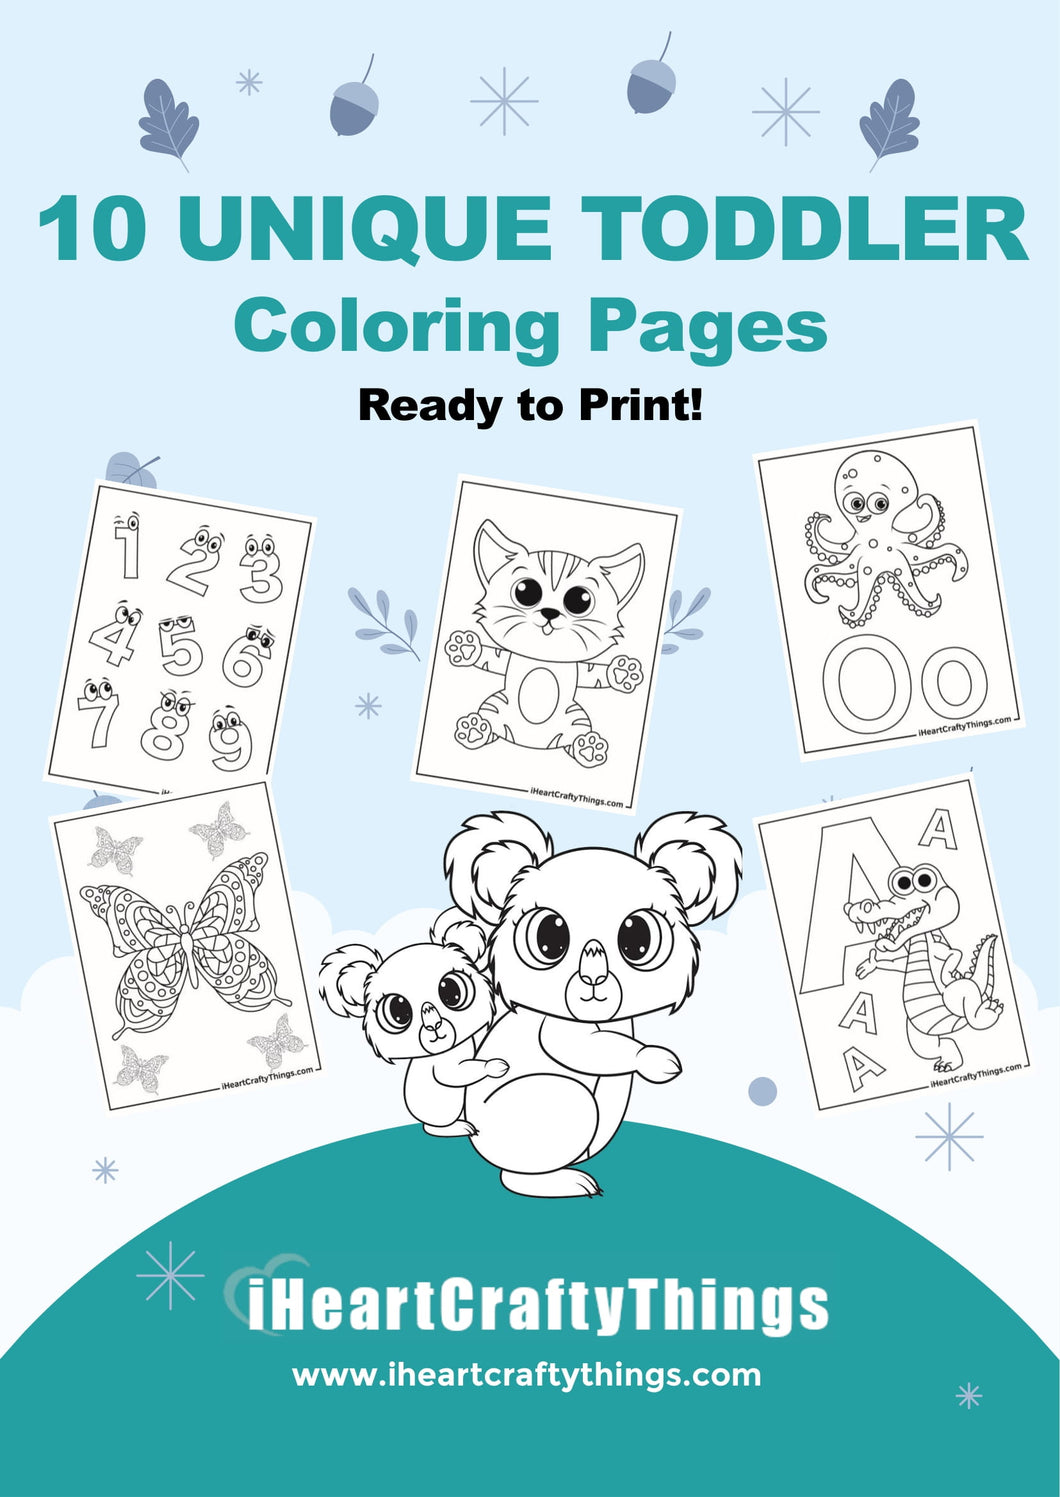 10 TODDLER COLORING PAGES